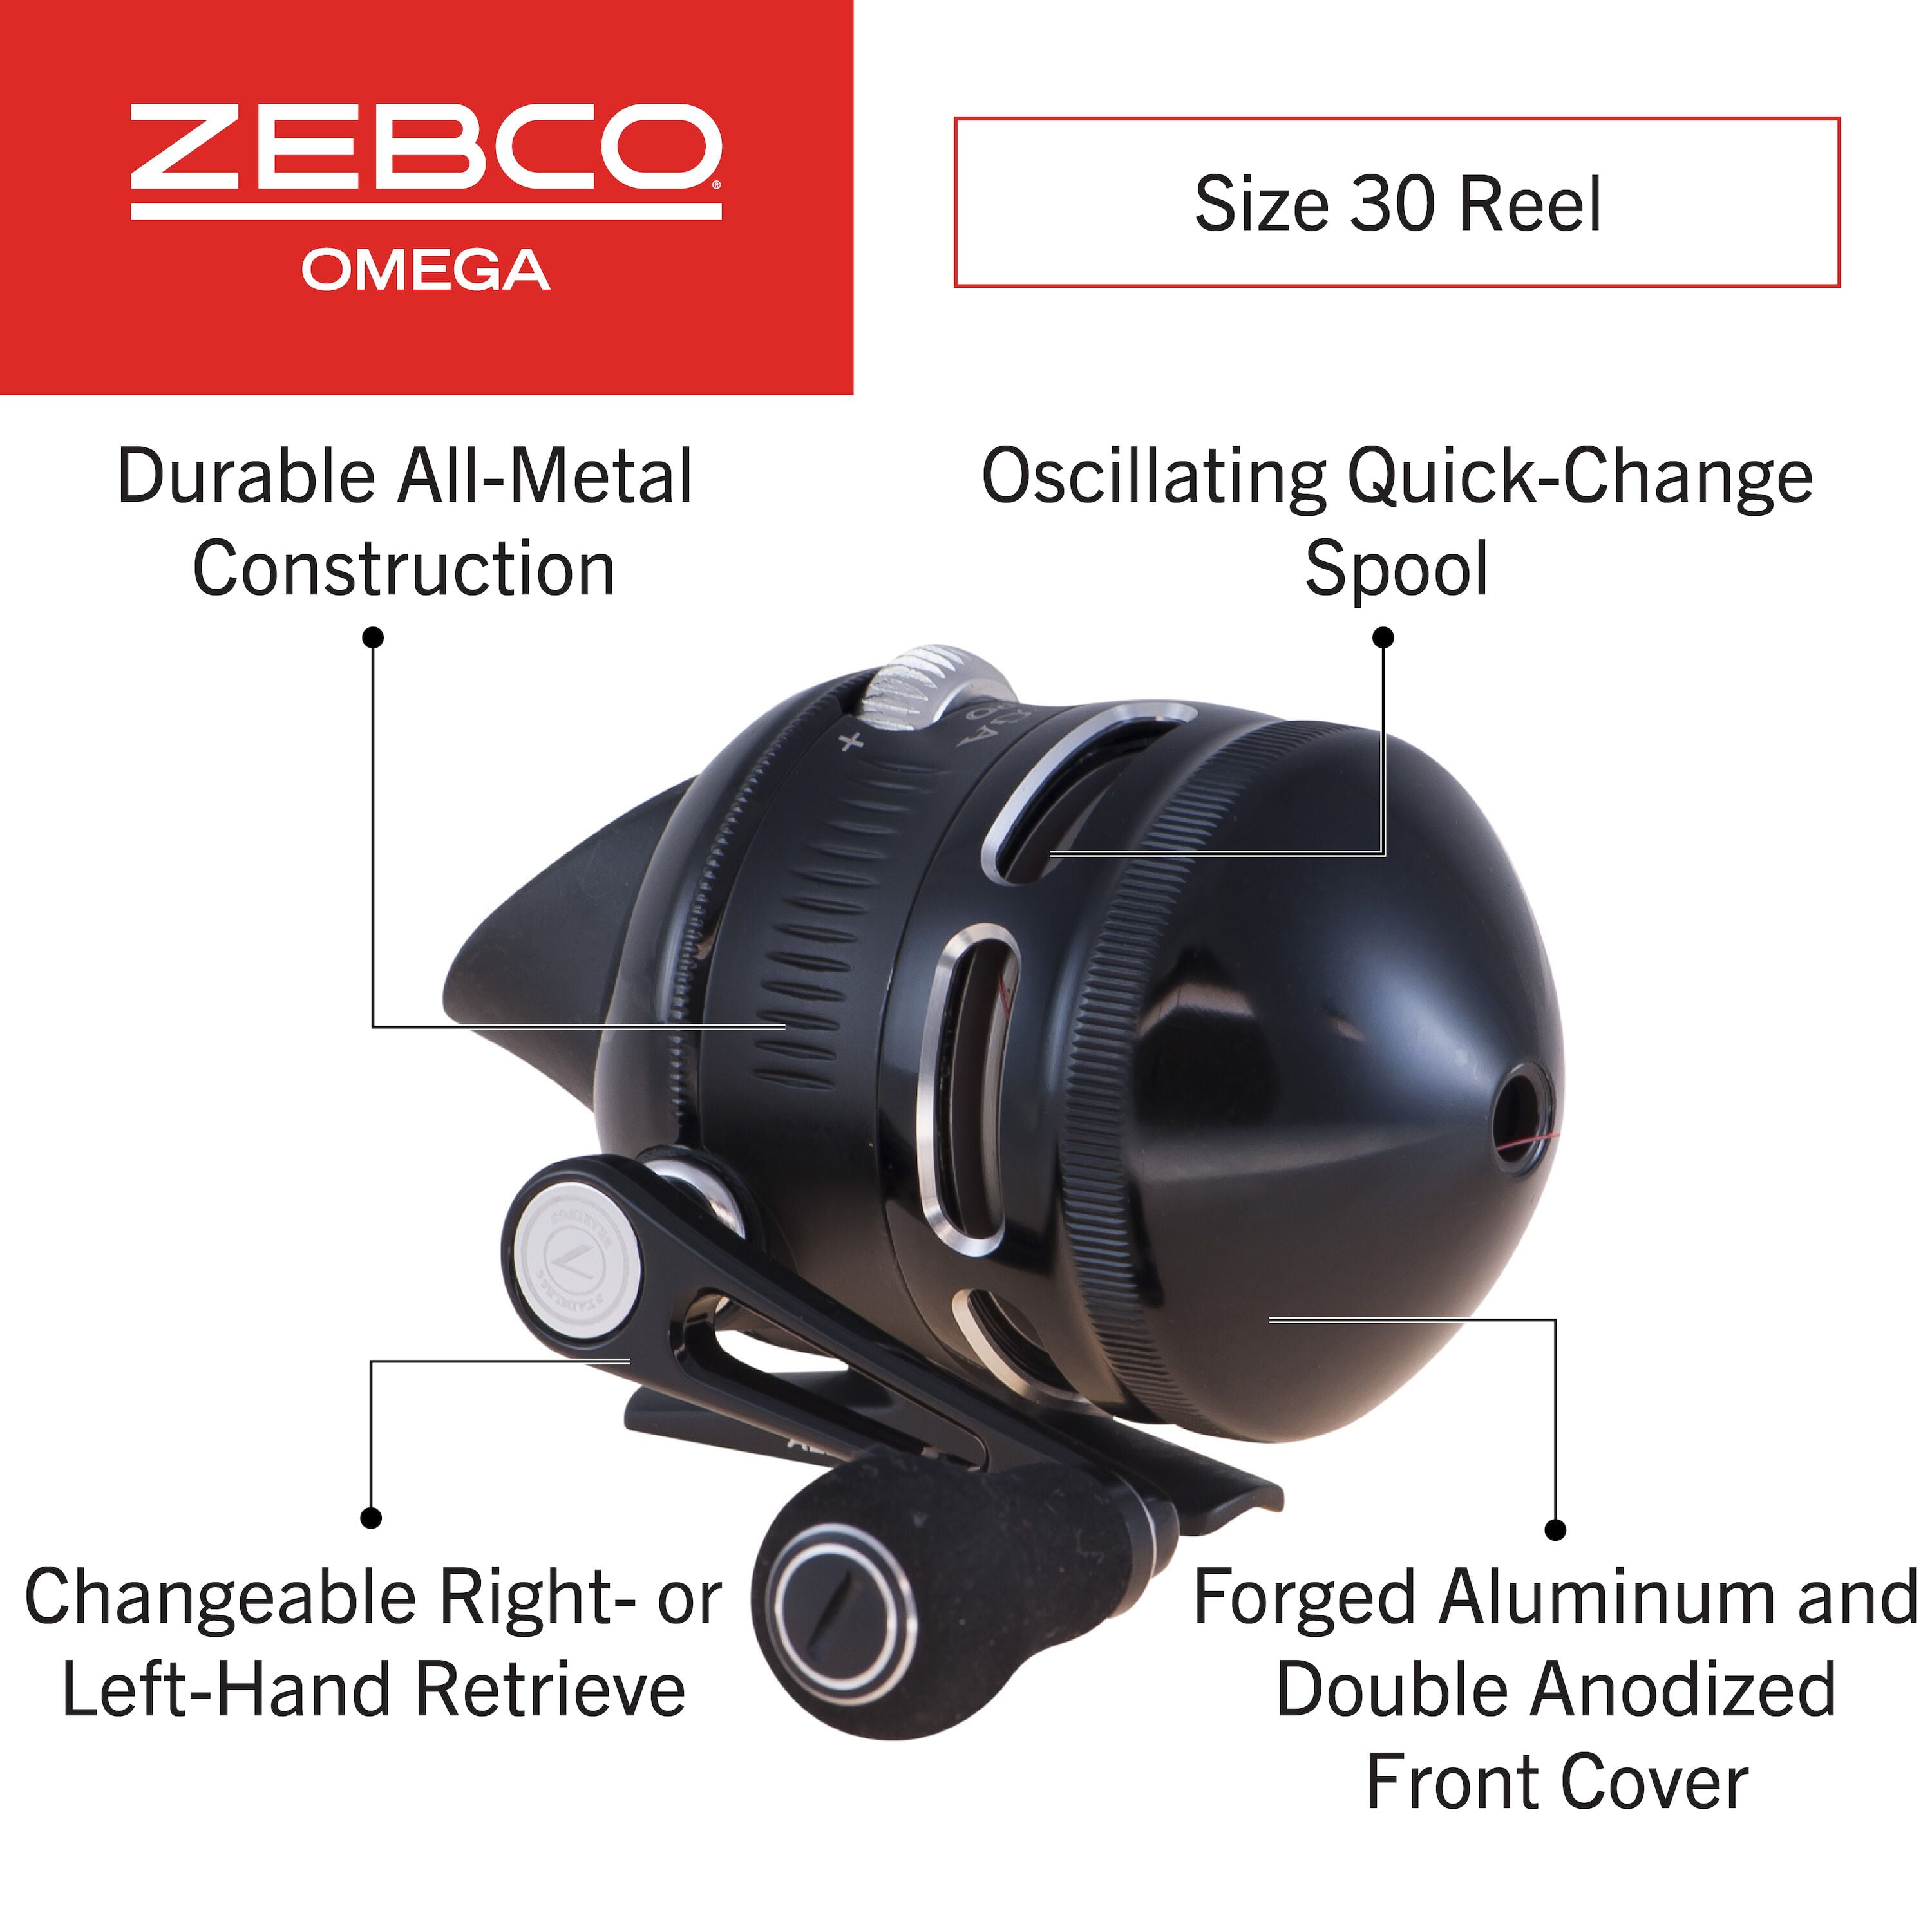 Zebco Omega Pro Spincast Fishing Reel, Size 30 Reel, Changeable Right or  Left-Hand Retrieve, Includes a Spare Spool and an Extra Dual-Paddle Handle,  Aluminum and Double Anodized Front Cover, Black 